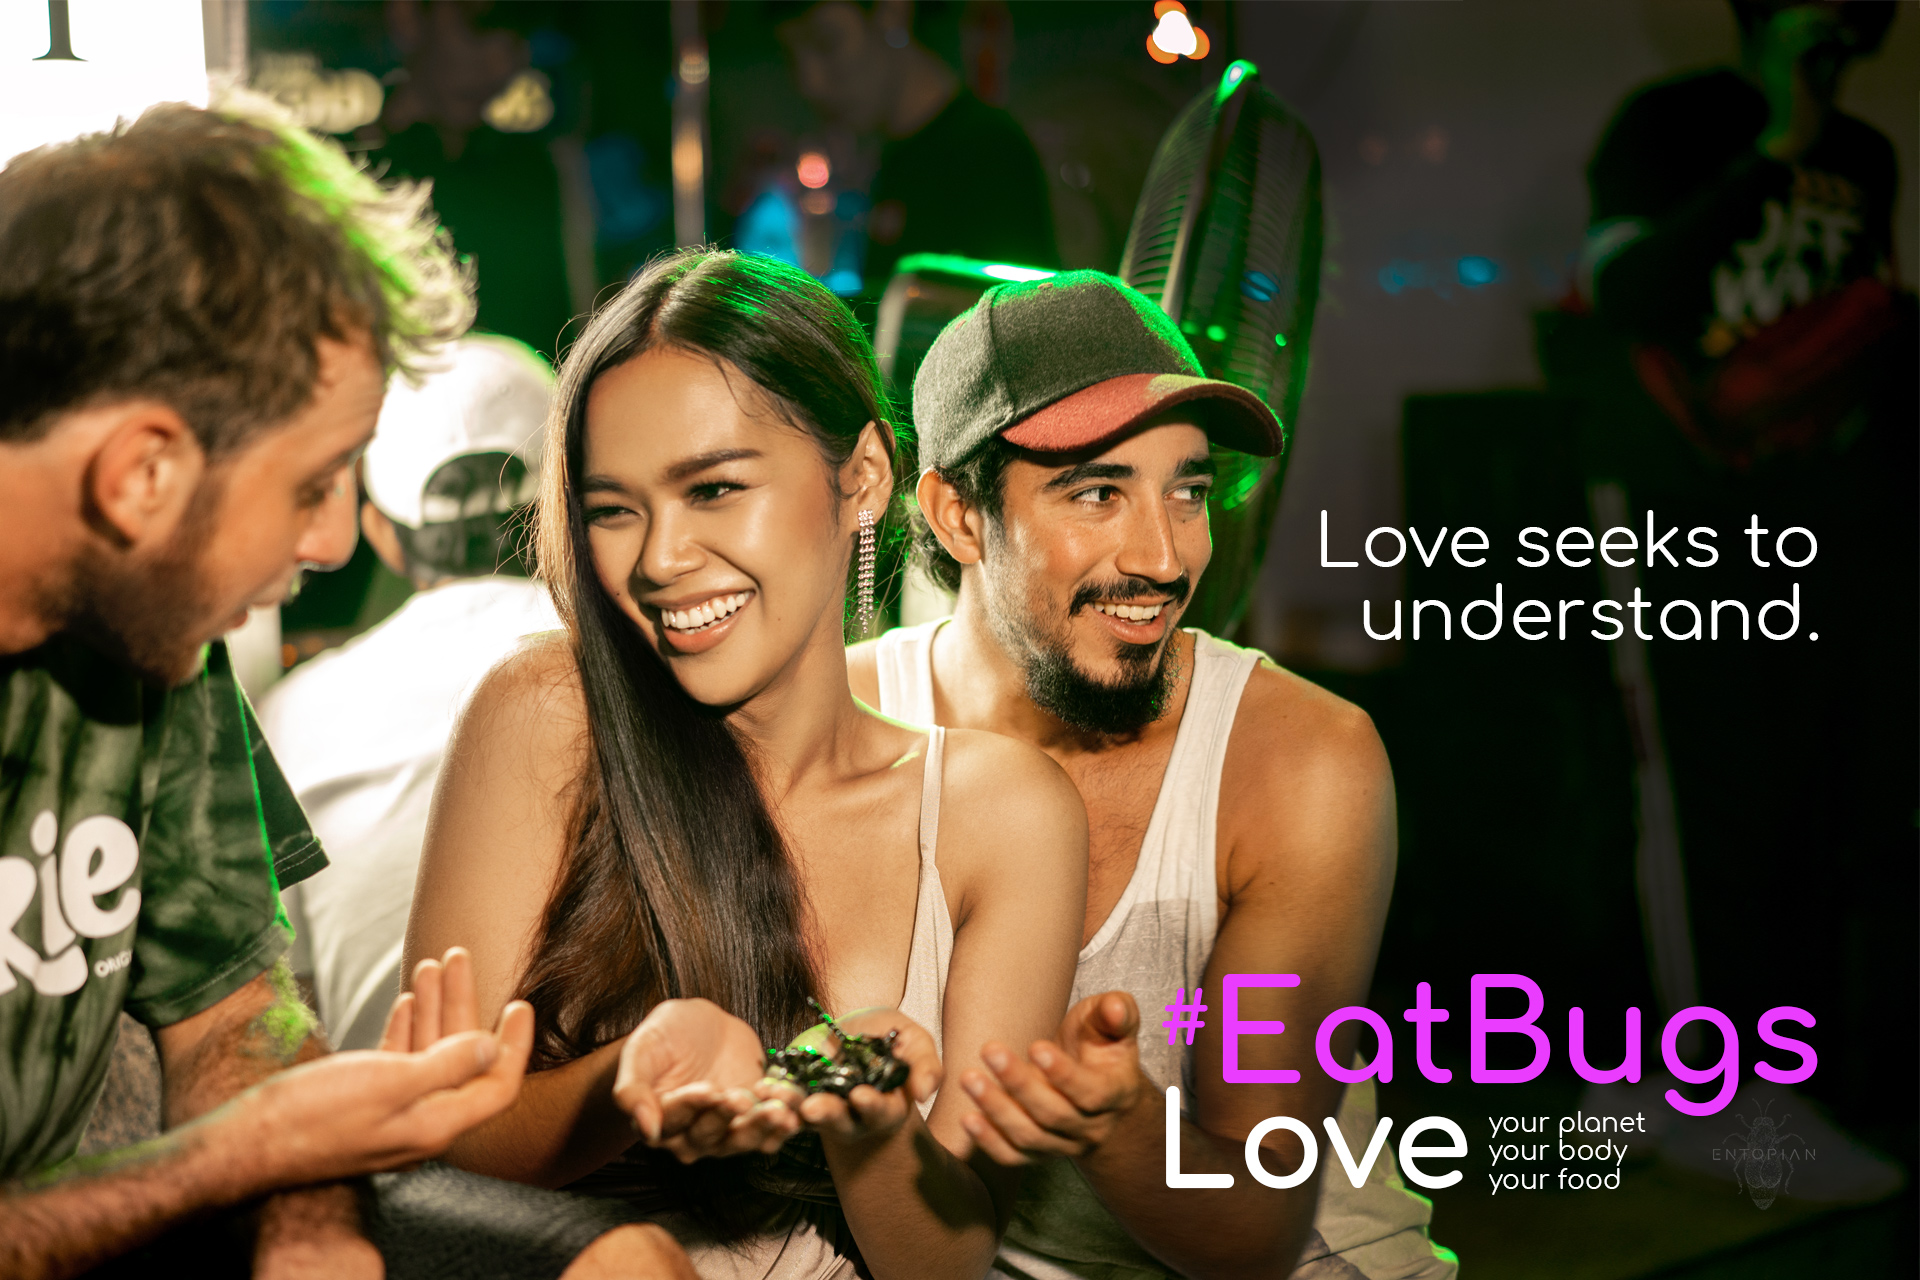 Love #EatBugs - love for people and planet seeks to understand edible insects